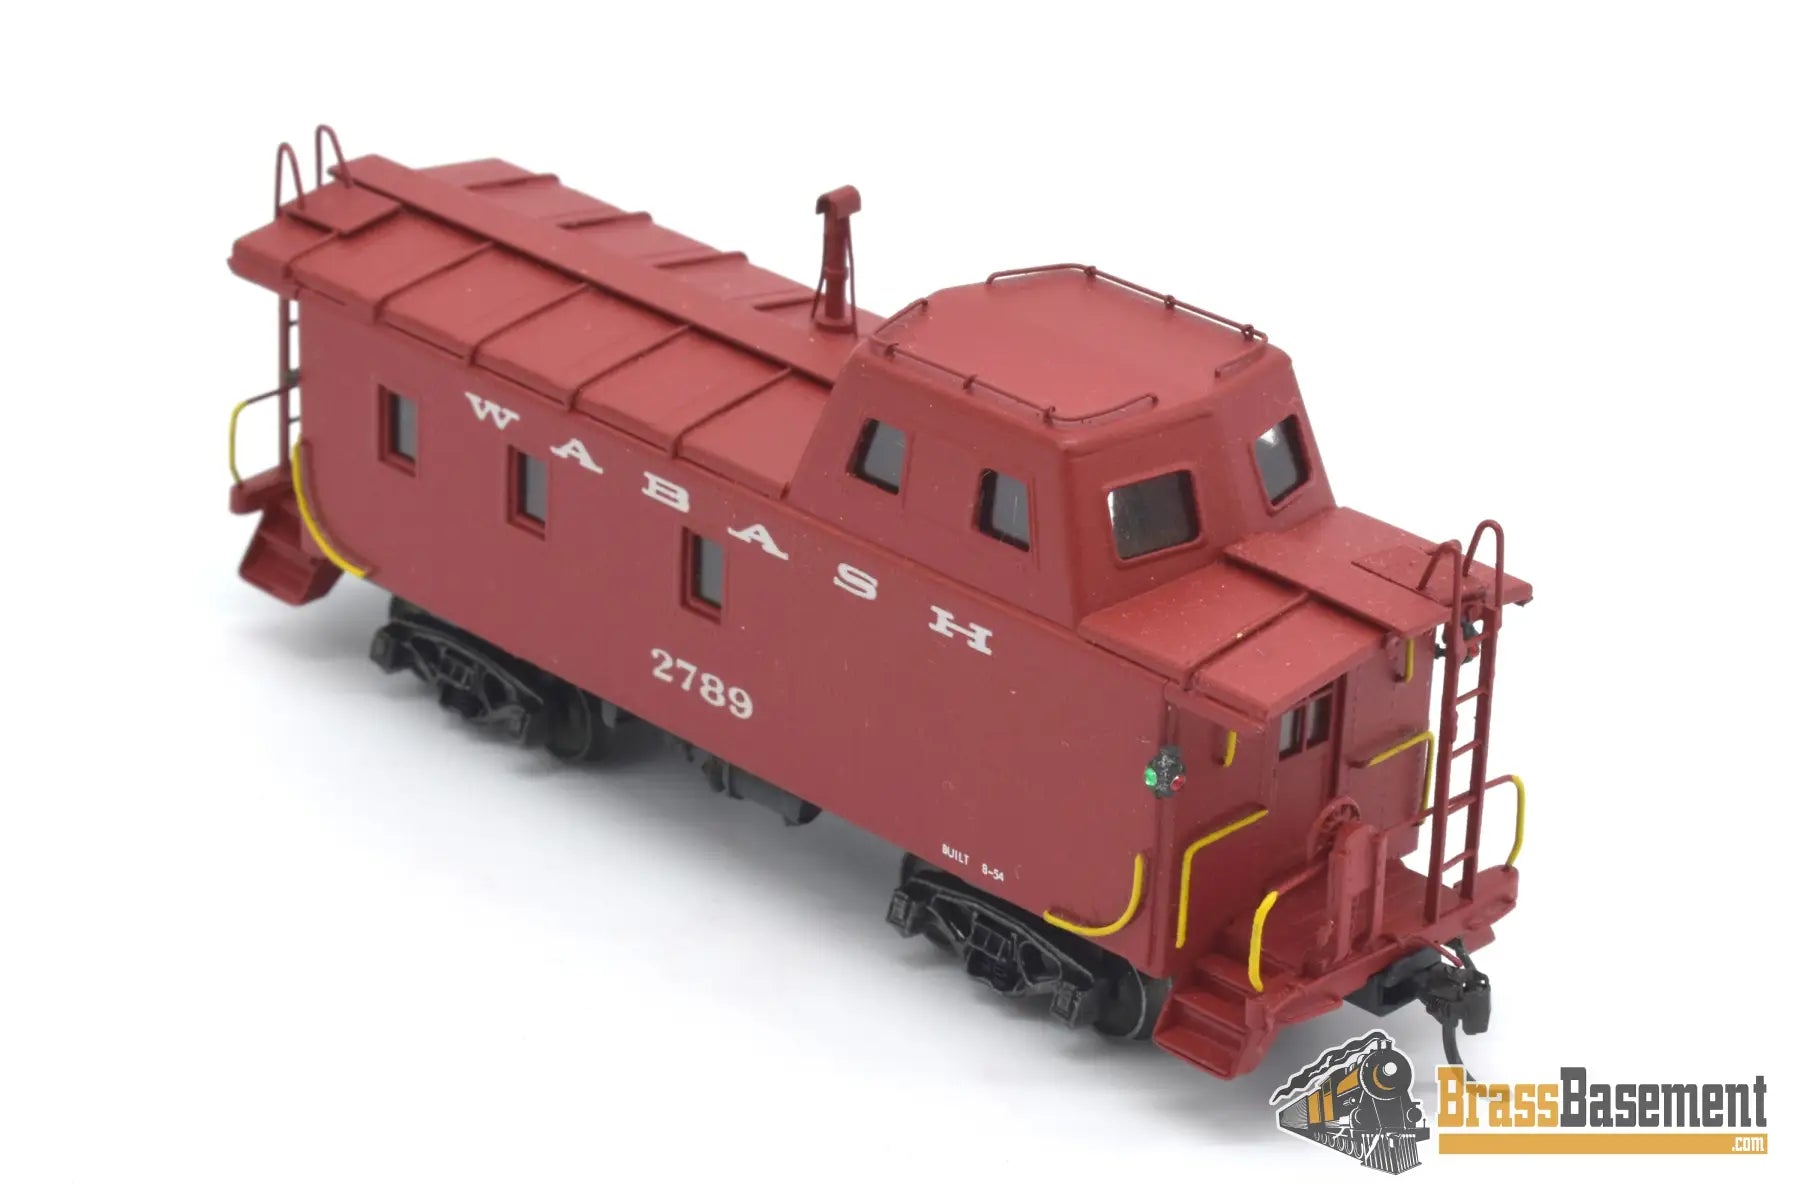 Ho Brass - Omi 1242 Wabash Streamlined Caboose #2789 Custom Painted Red Freight